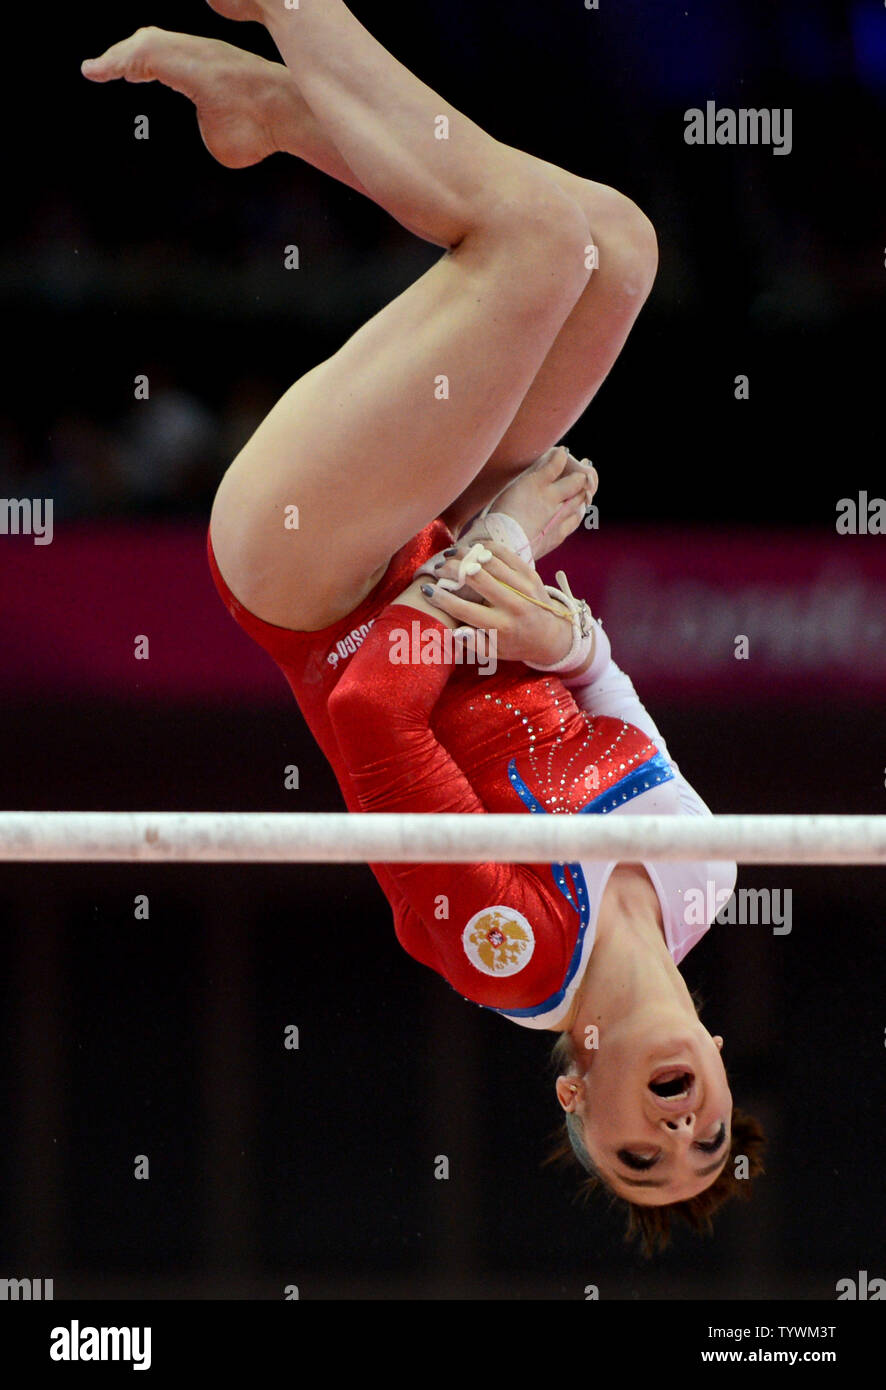 Russia S Aliya Mustafina Does Her Gold Medal Routine On The Uneven